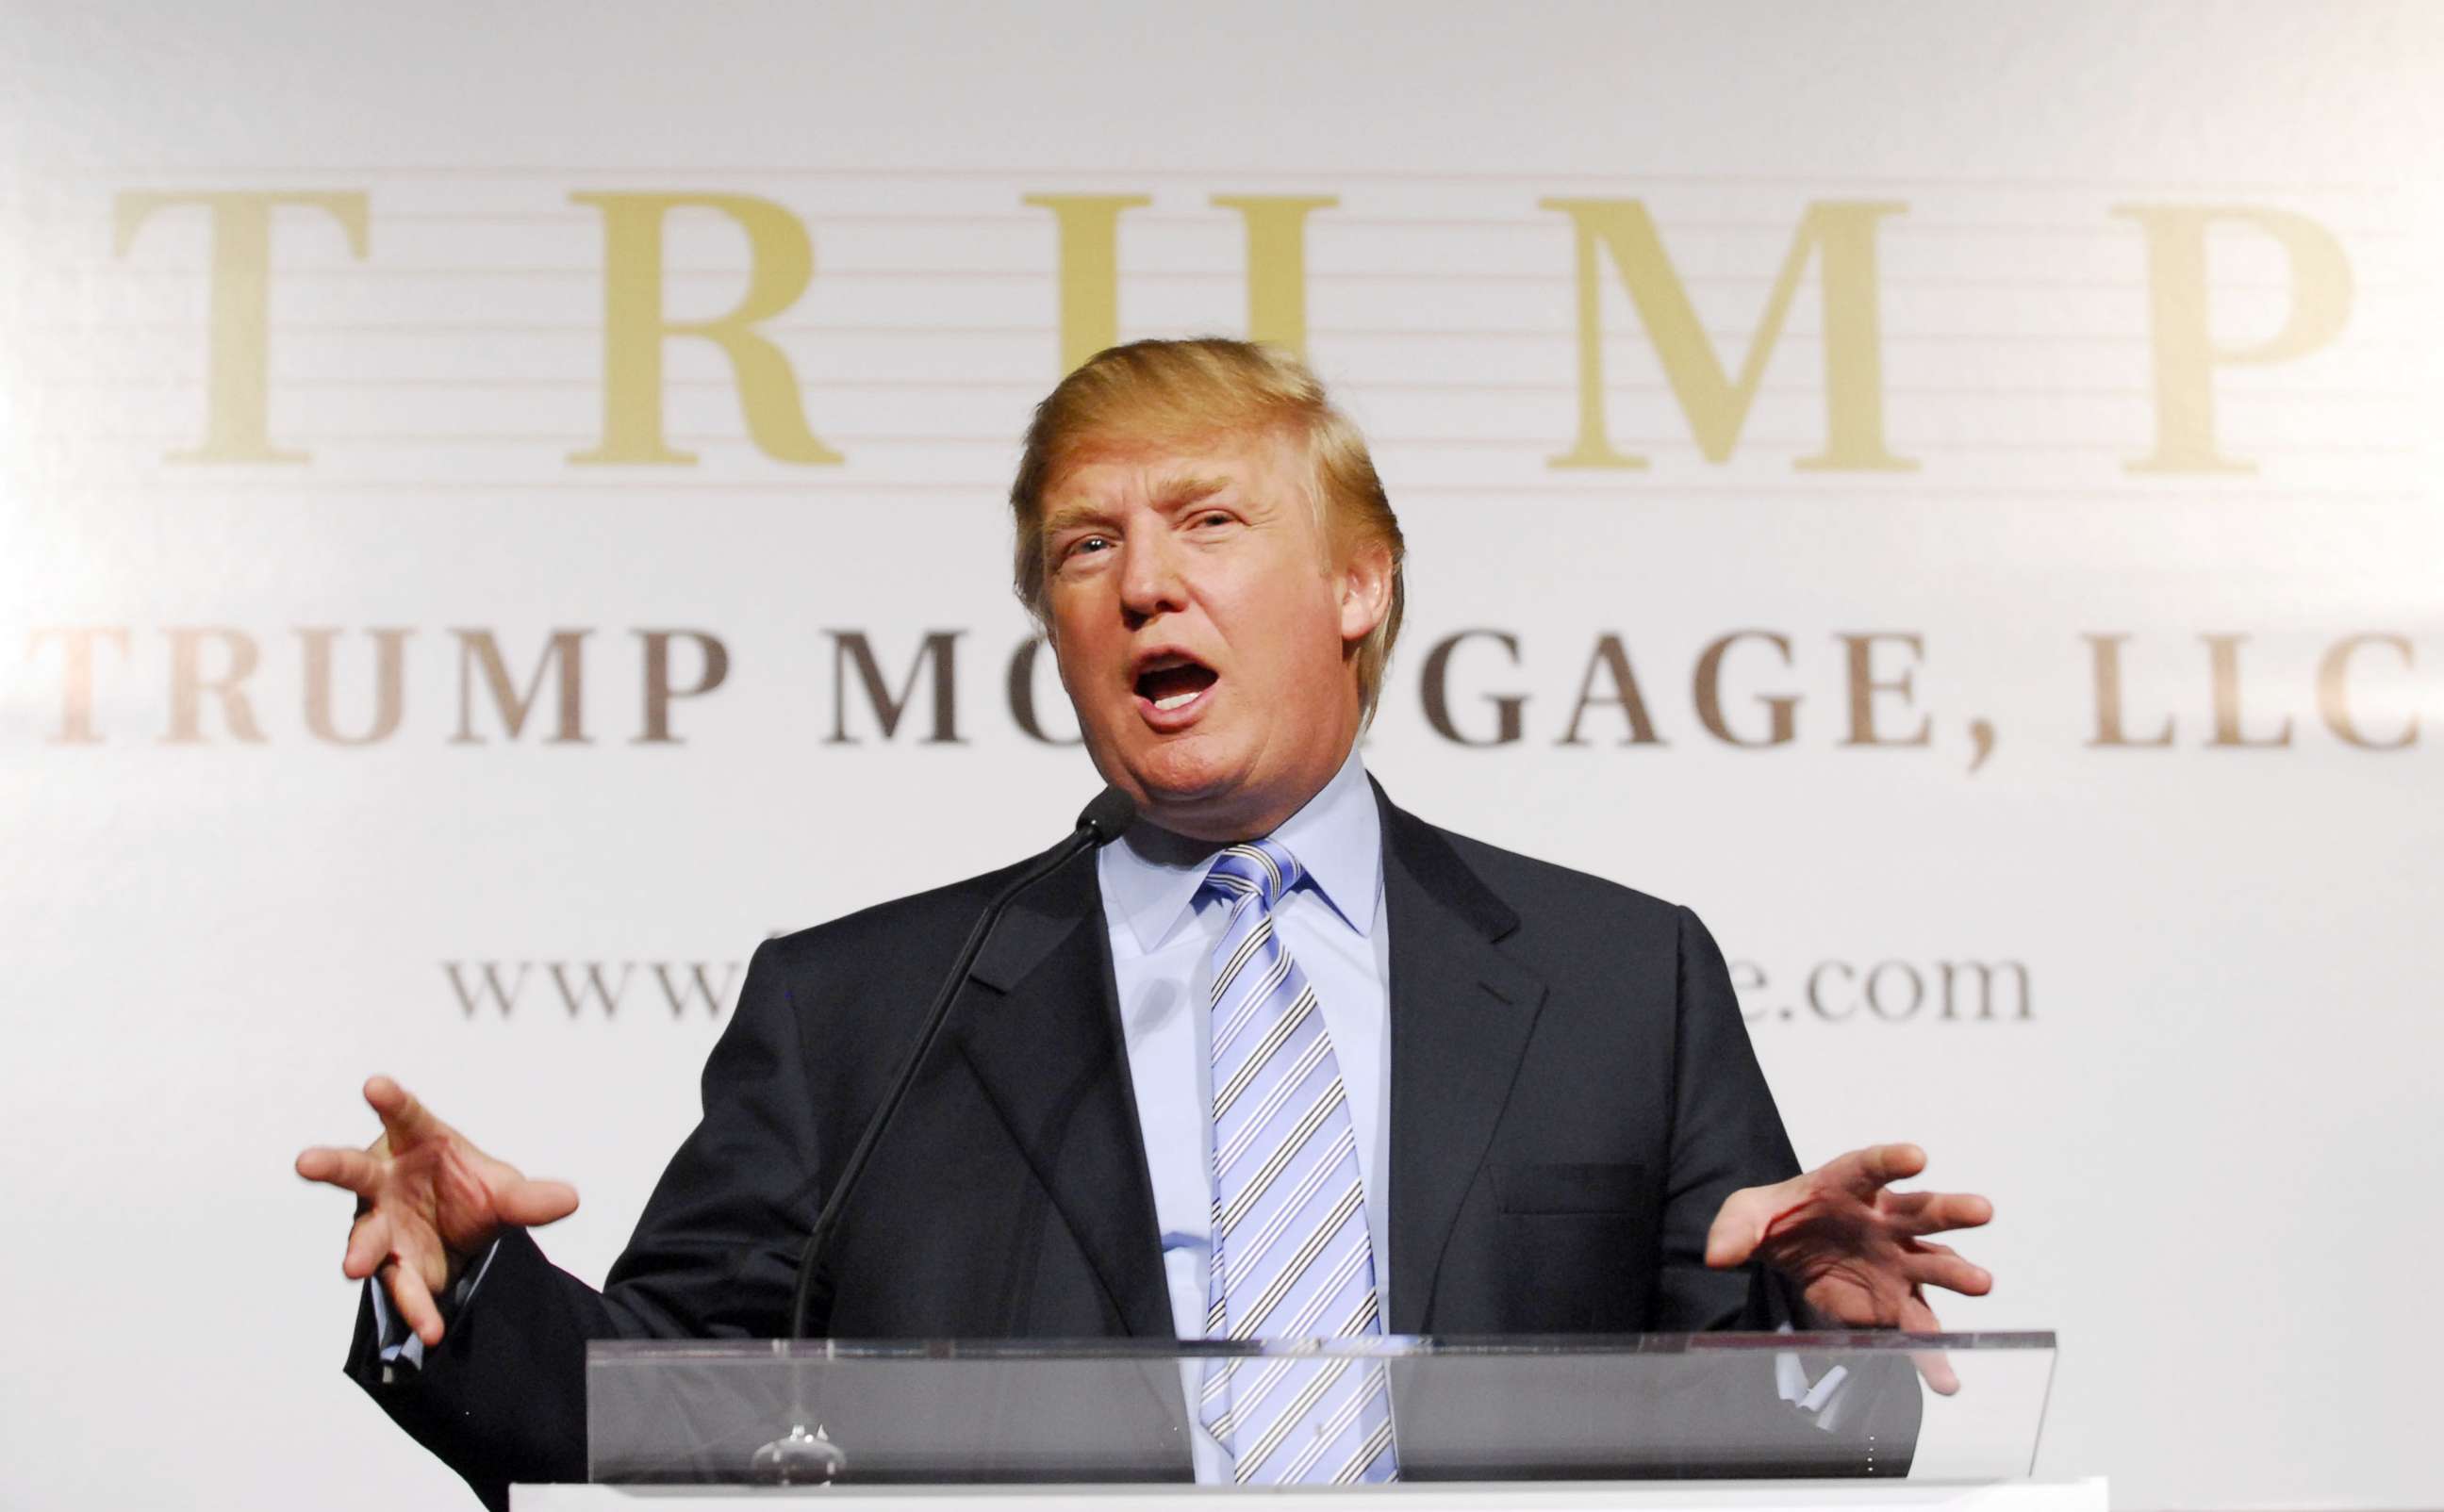 PHOTO: Donald Trump during speaks during a press conference in New York, April 4, 2006.